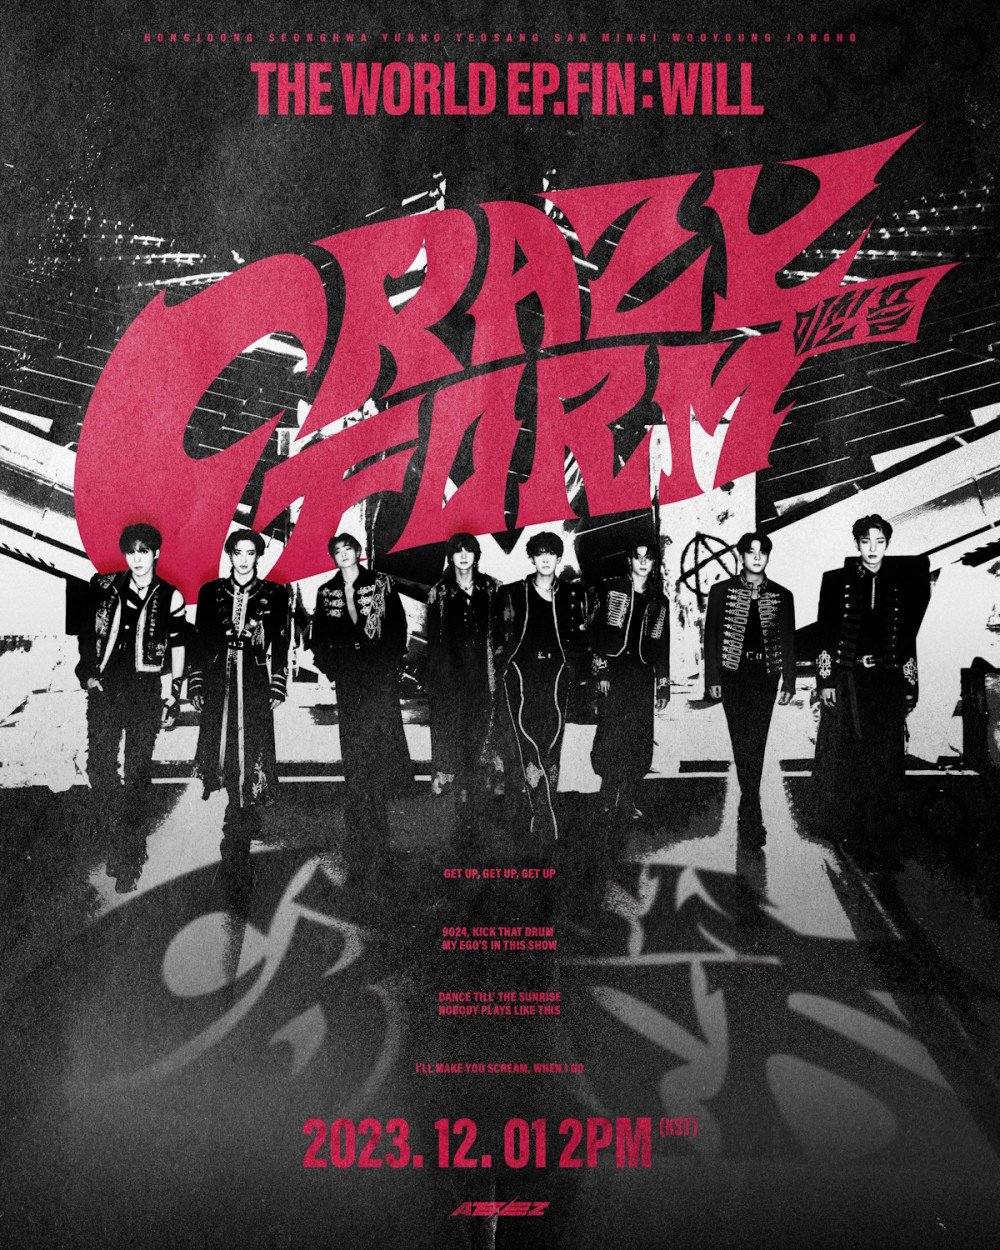 ATEEZ reveal street punk style in 'Crazy Form' teaser poster